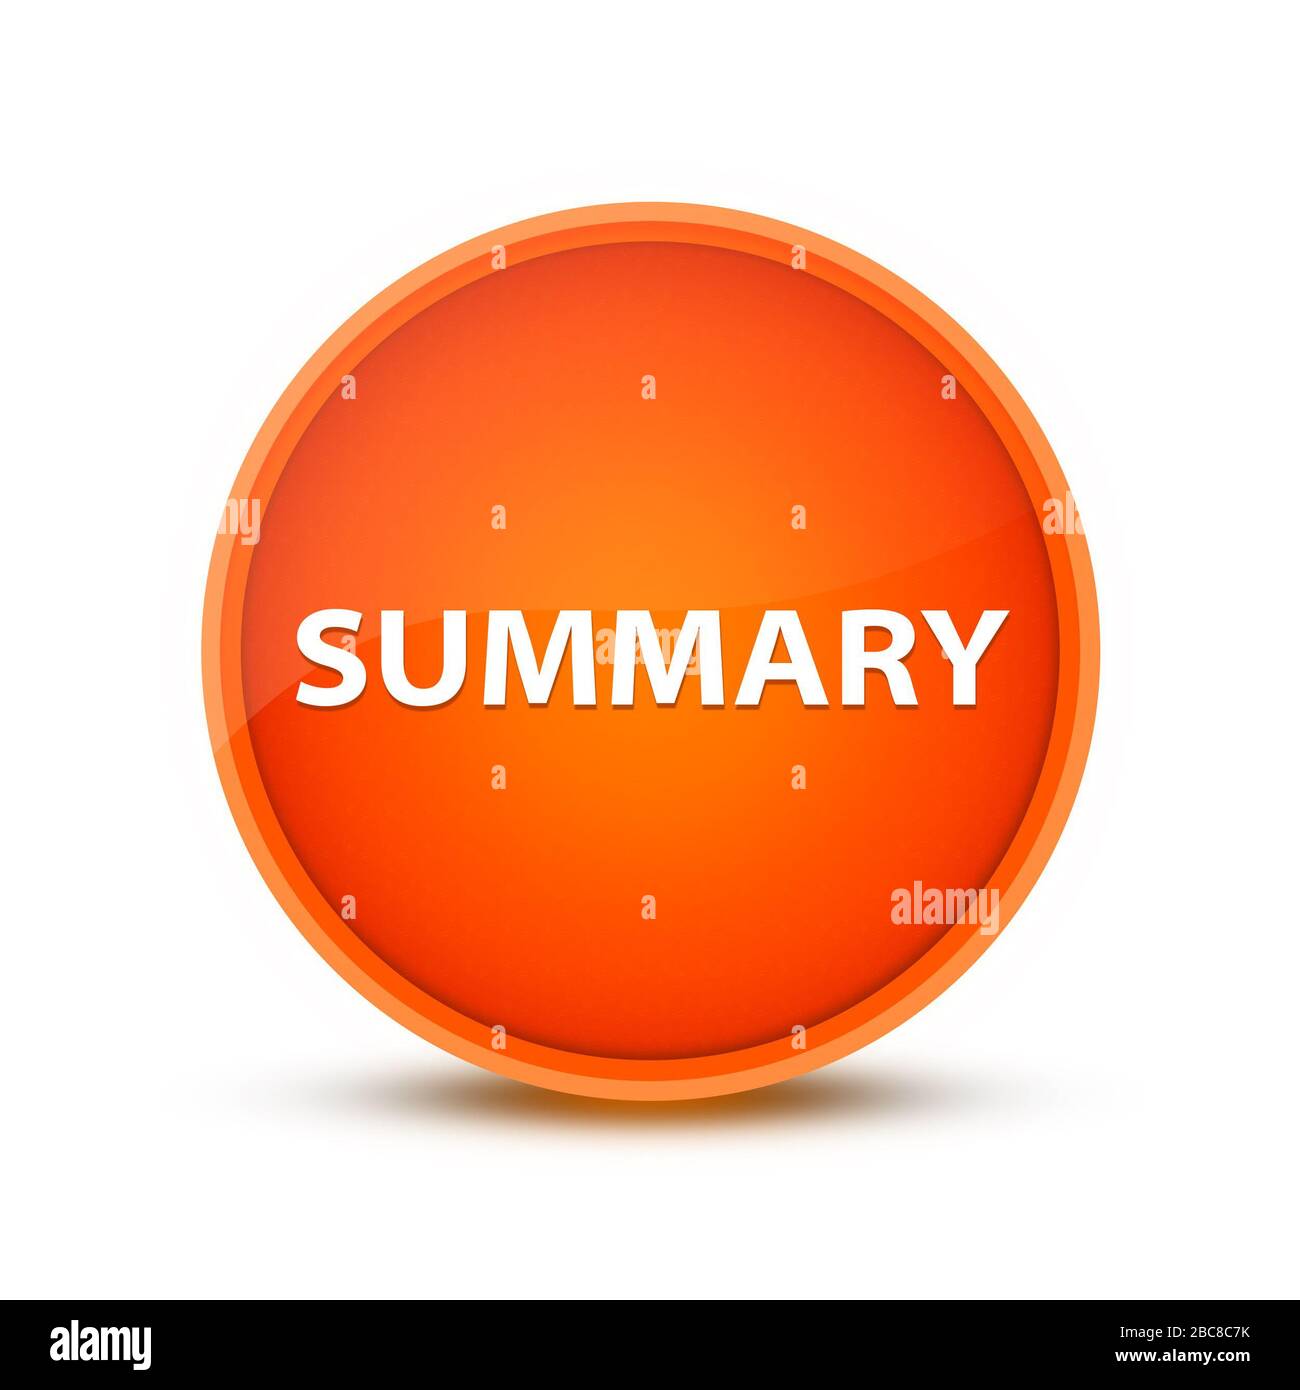 Summary isolated on special orange round button abstract illustration Stock Photo